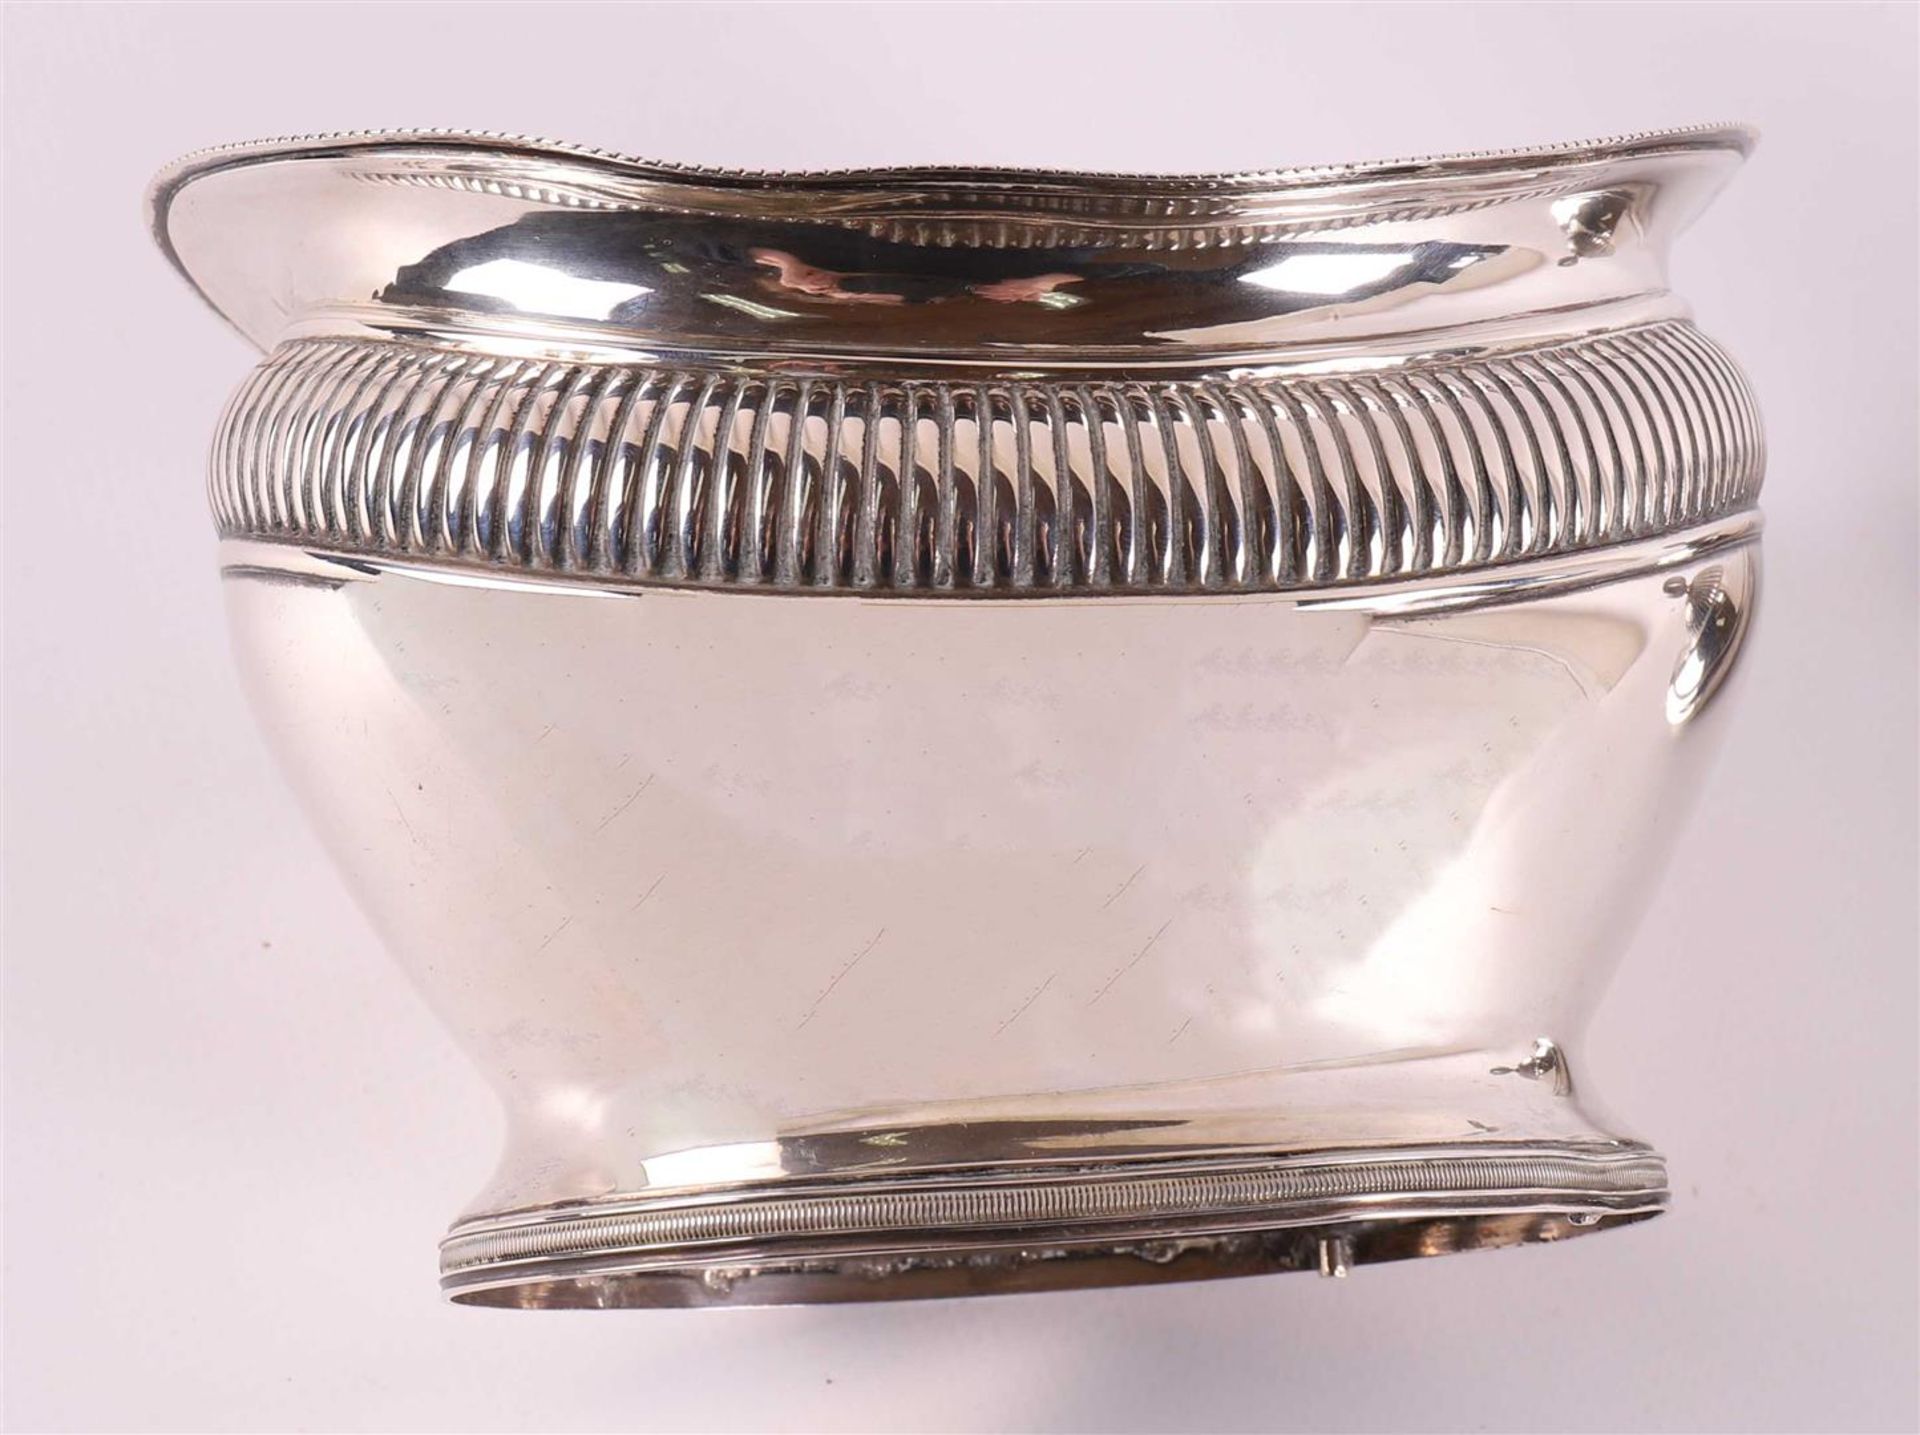 A 1st grade 925/1000 silver Empire boat-shaped tobacco lidded jar, - Image 8 of 9